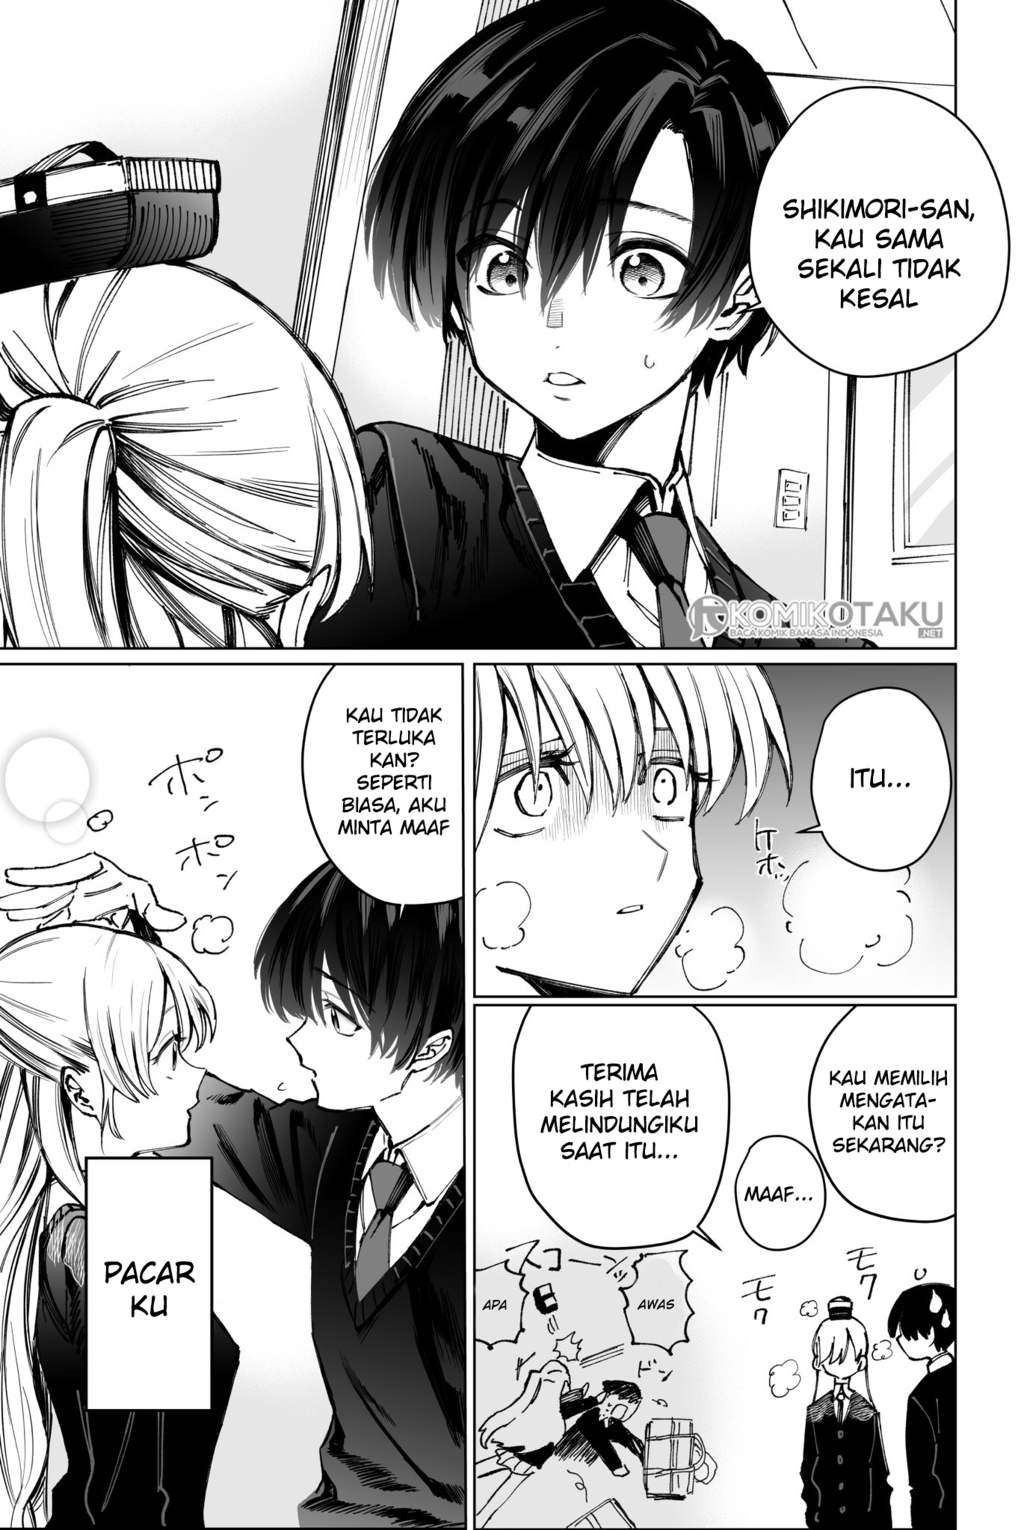 That Girl Is Not Just Cute Chapter 02 Bahasa Indonesia